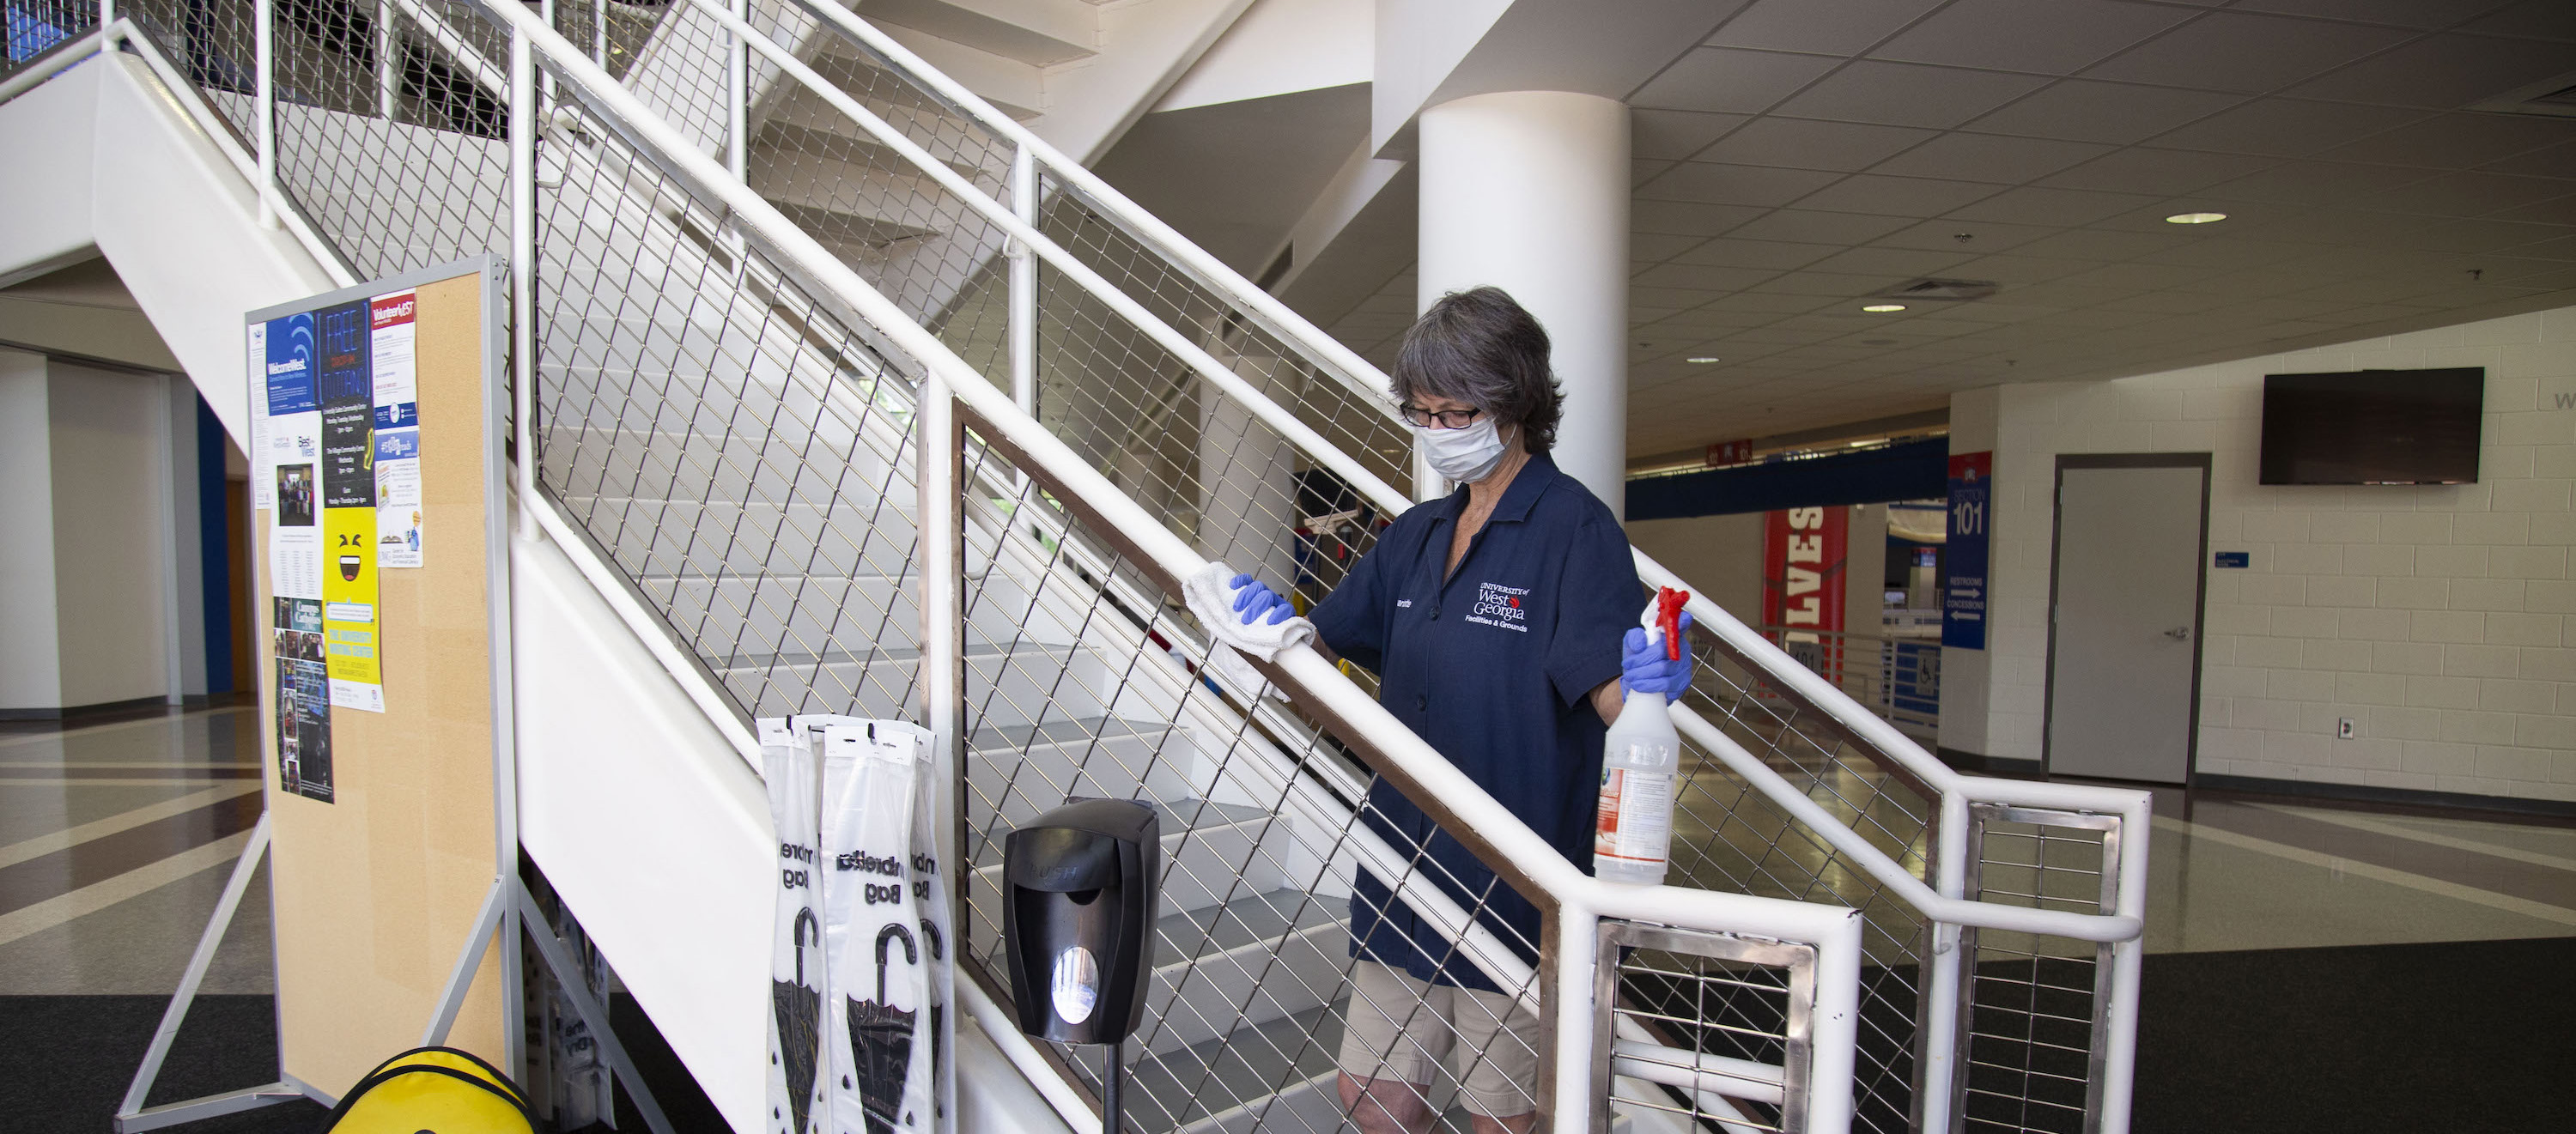 custodial staff member disinfecting a surface